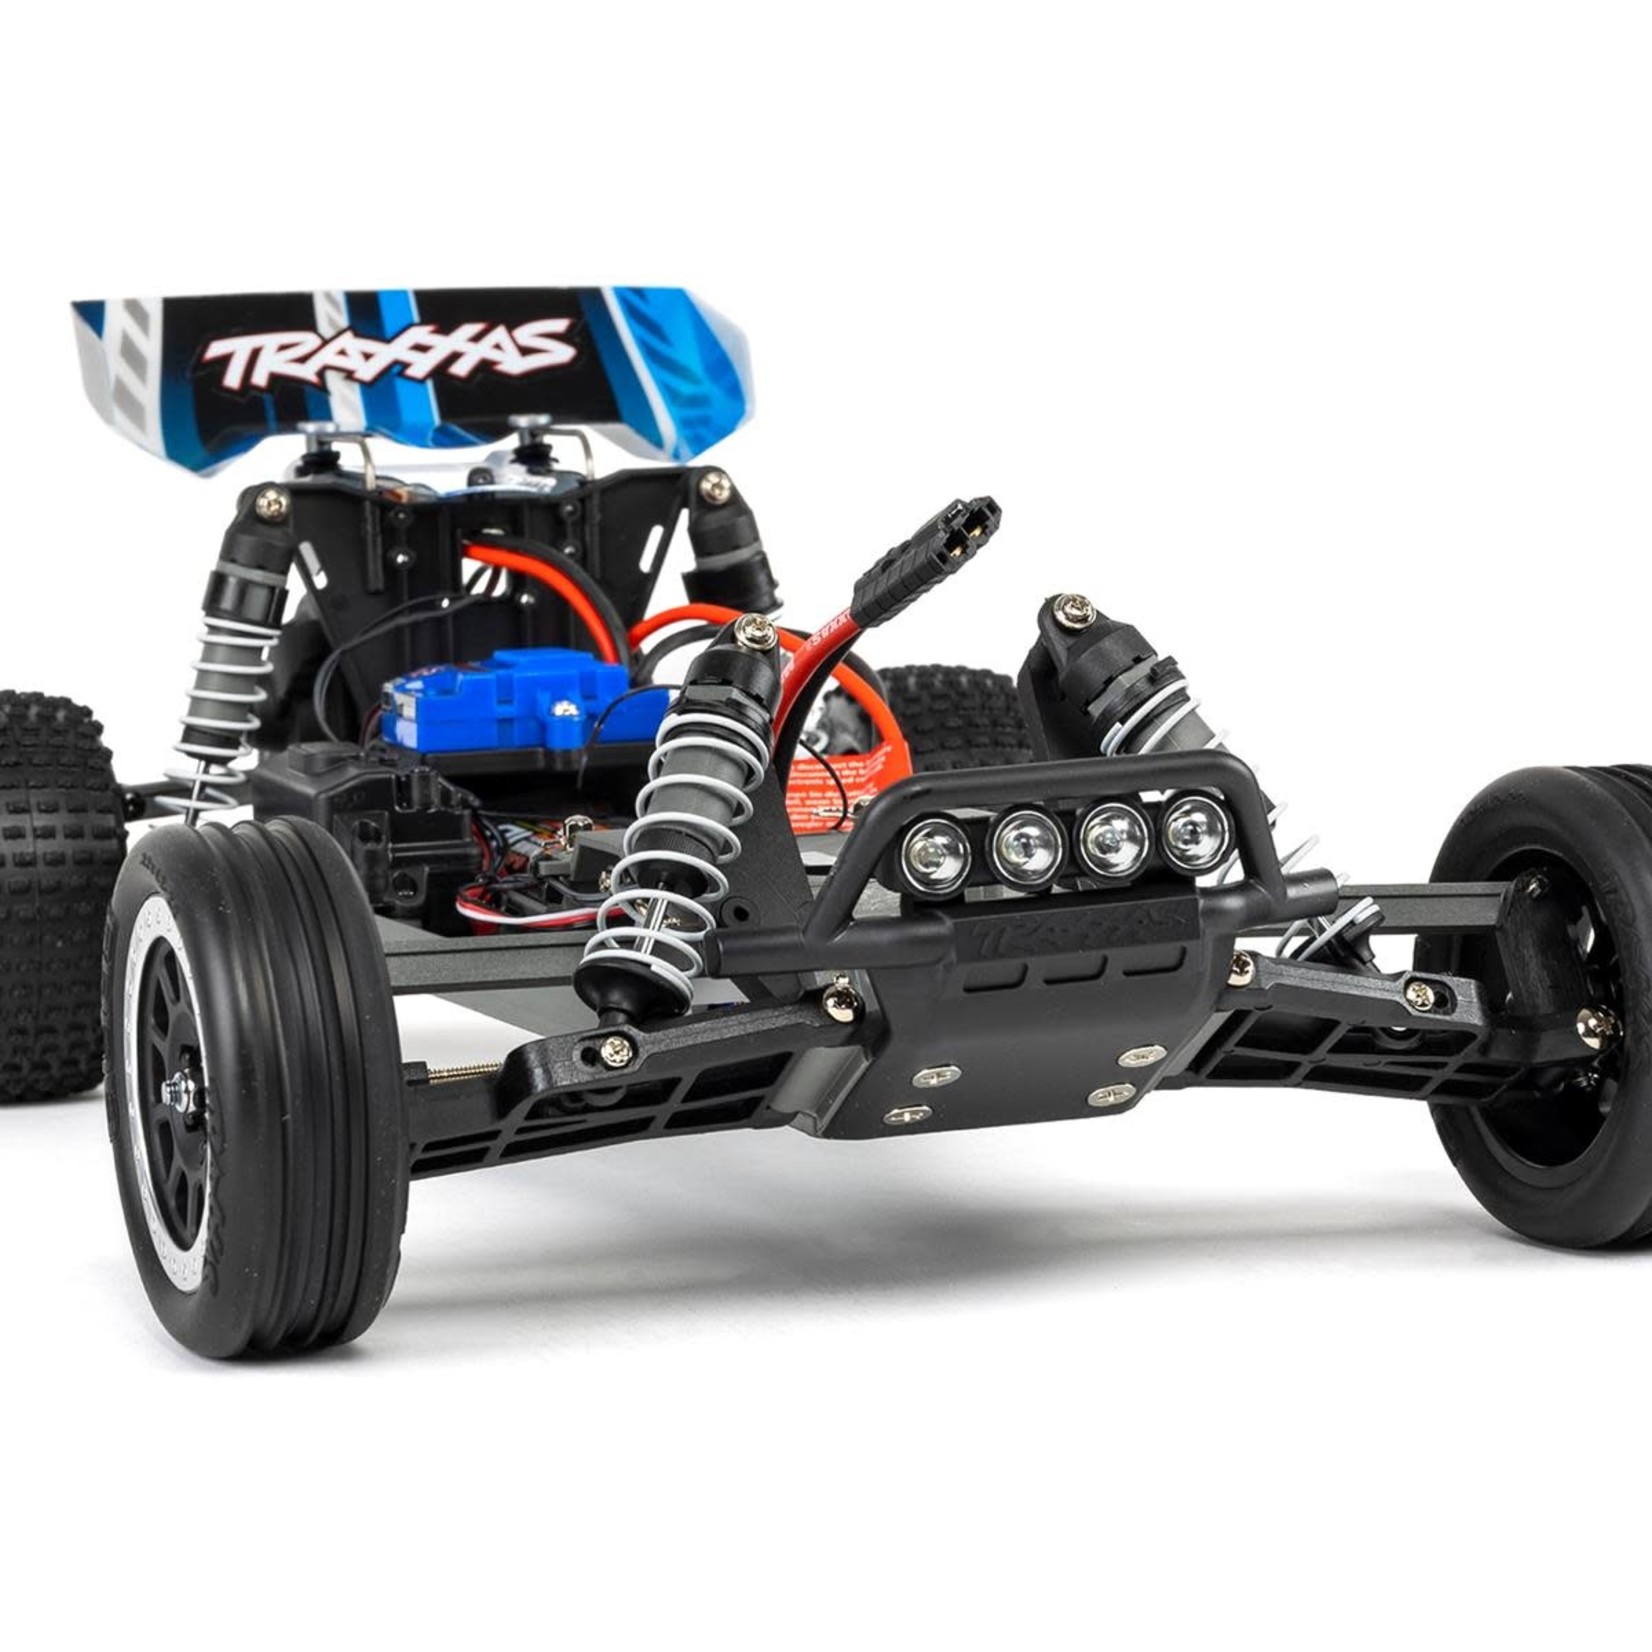 Traxxas Traxxas Bandit 1/10 RTR 2WD Electric Buggy w/LED Lights (Green) w/XL-5 ESC, TQ 2.4GHz Radio, Battery & DC Charger #24054-61-GRN